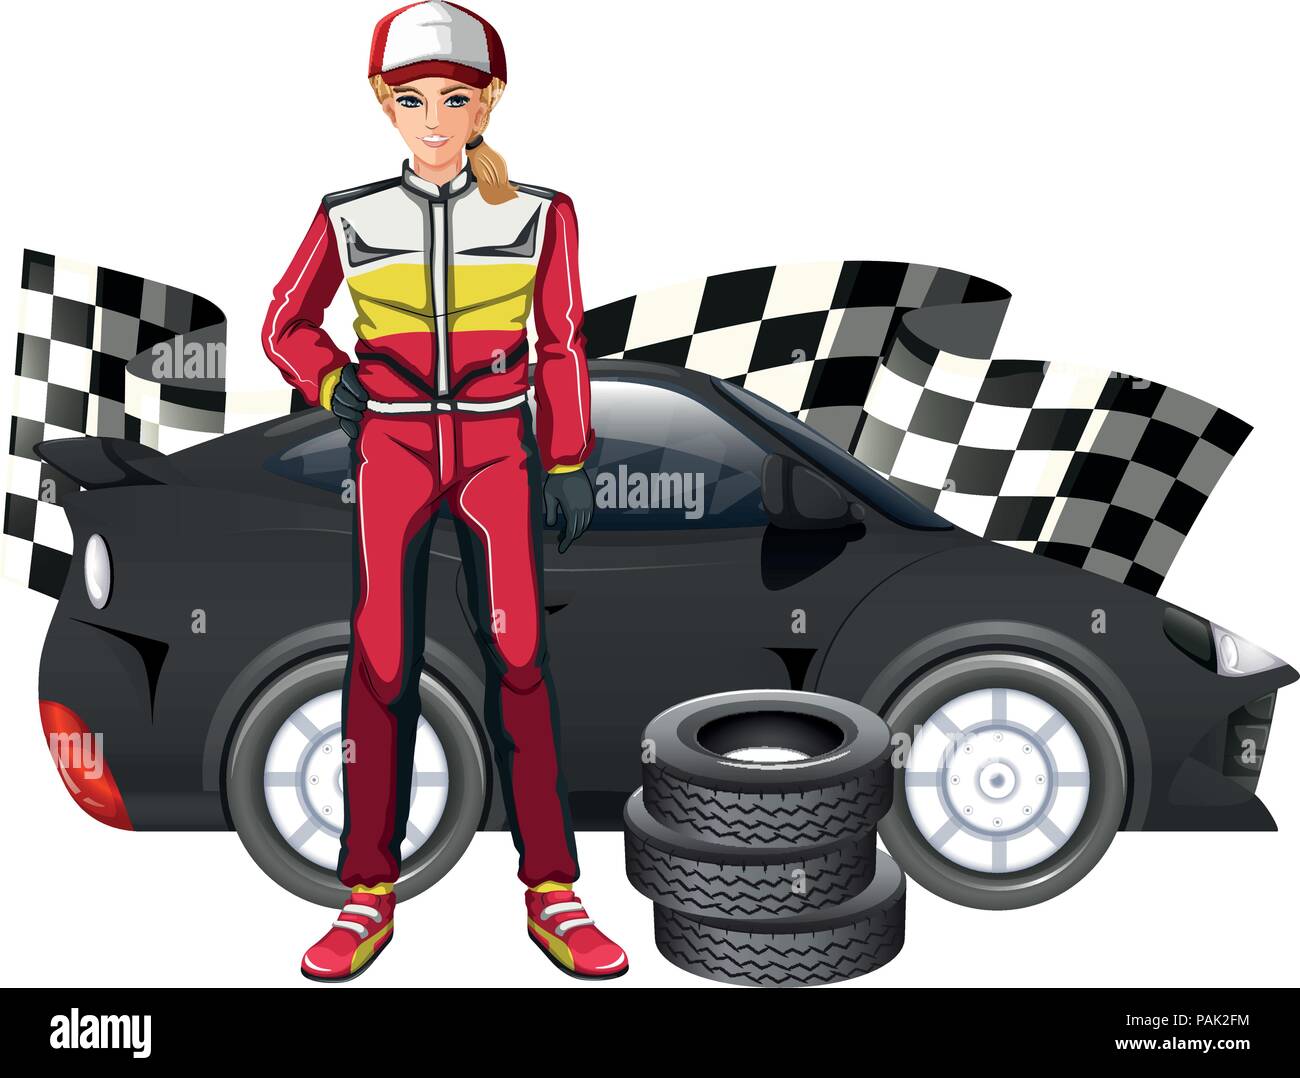 Female formula one driver and car illustration Stock Vector